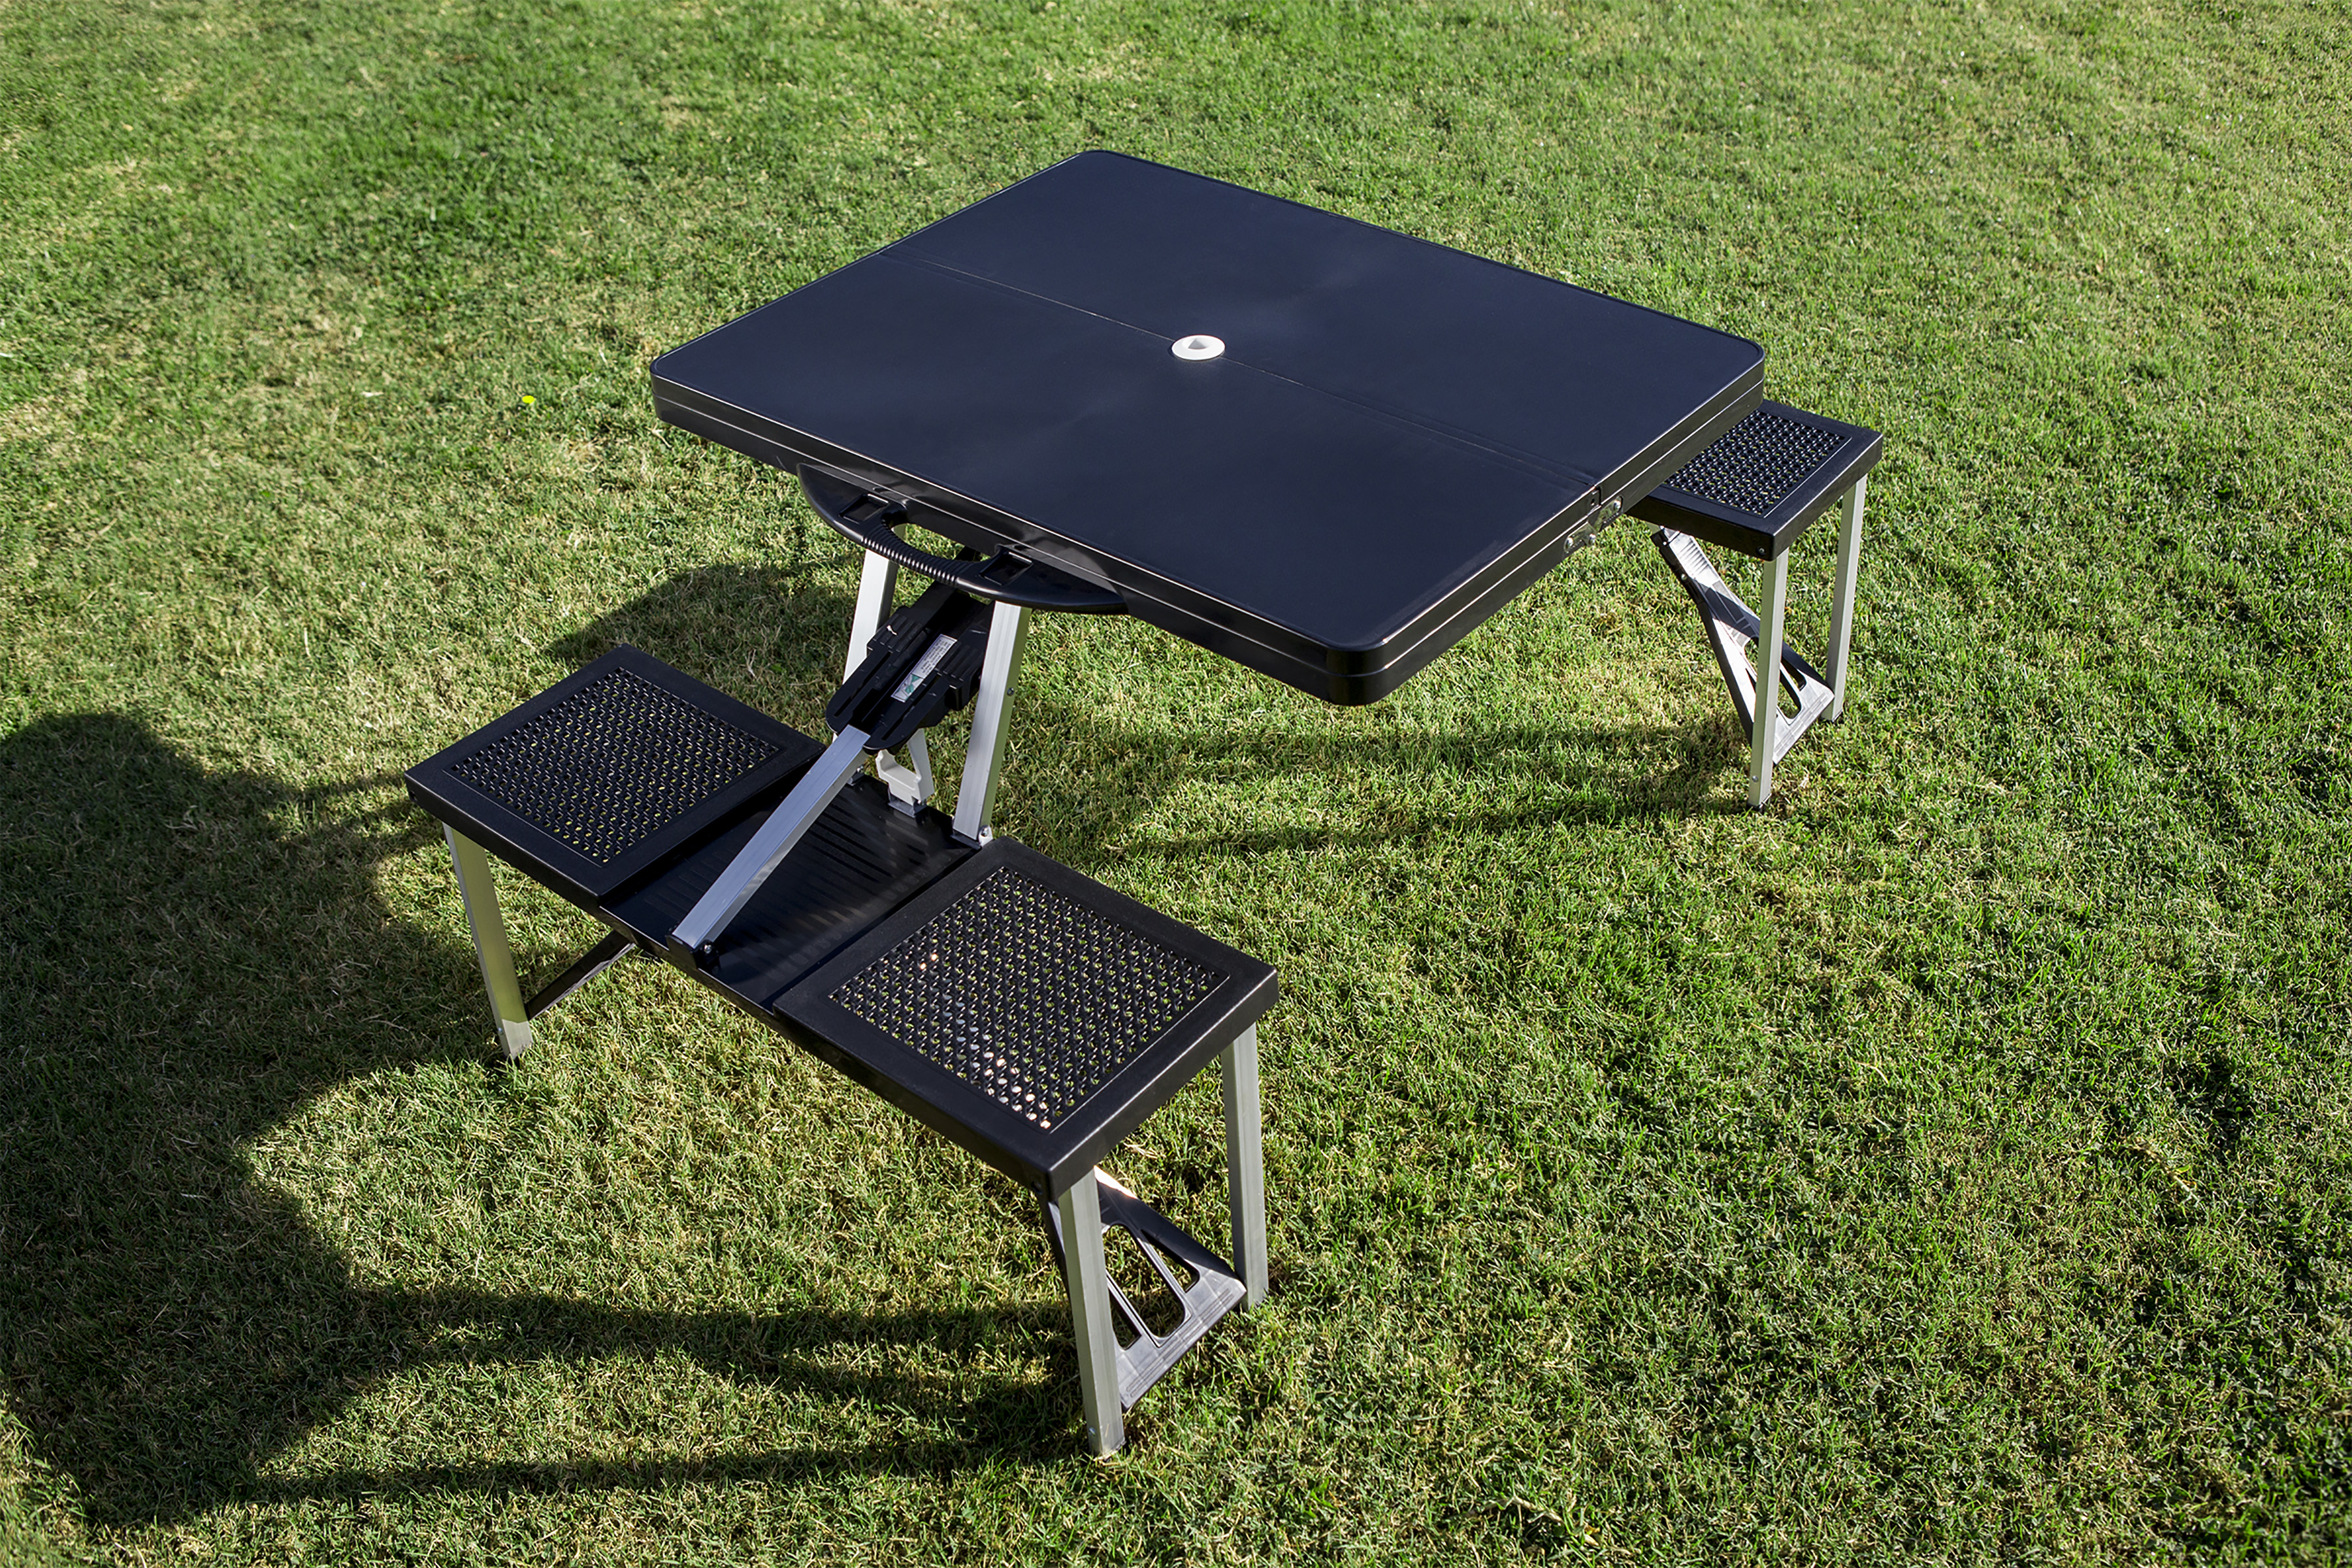 Football Field - Army Black Knights - Picnic Table Portable Folding Table with Seats